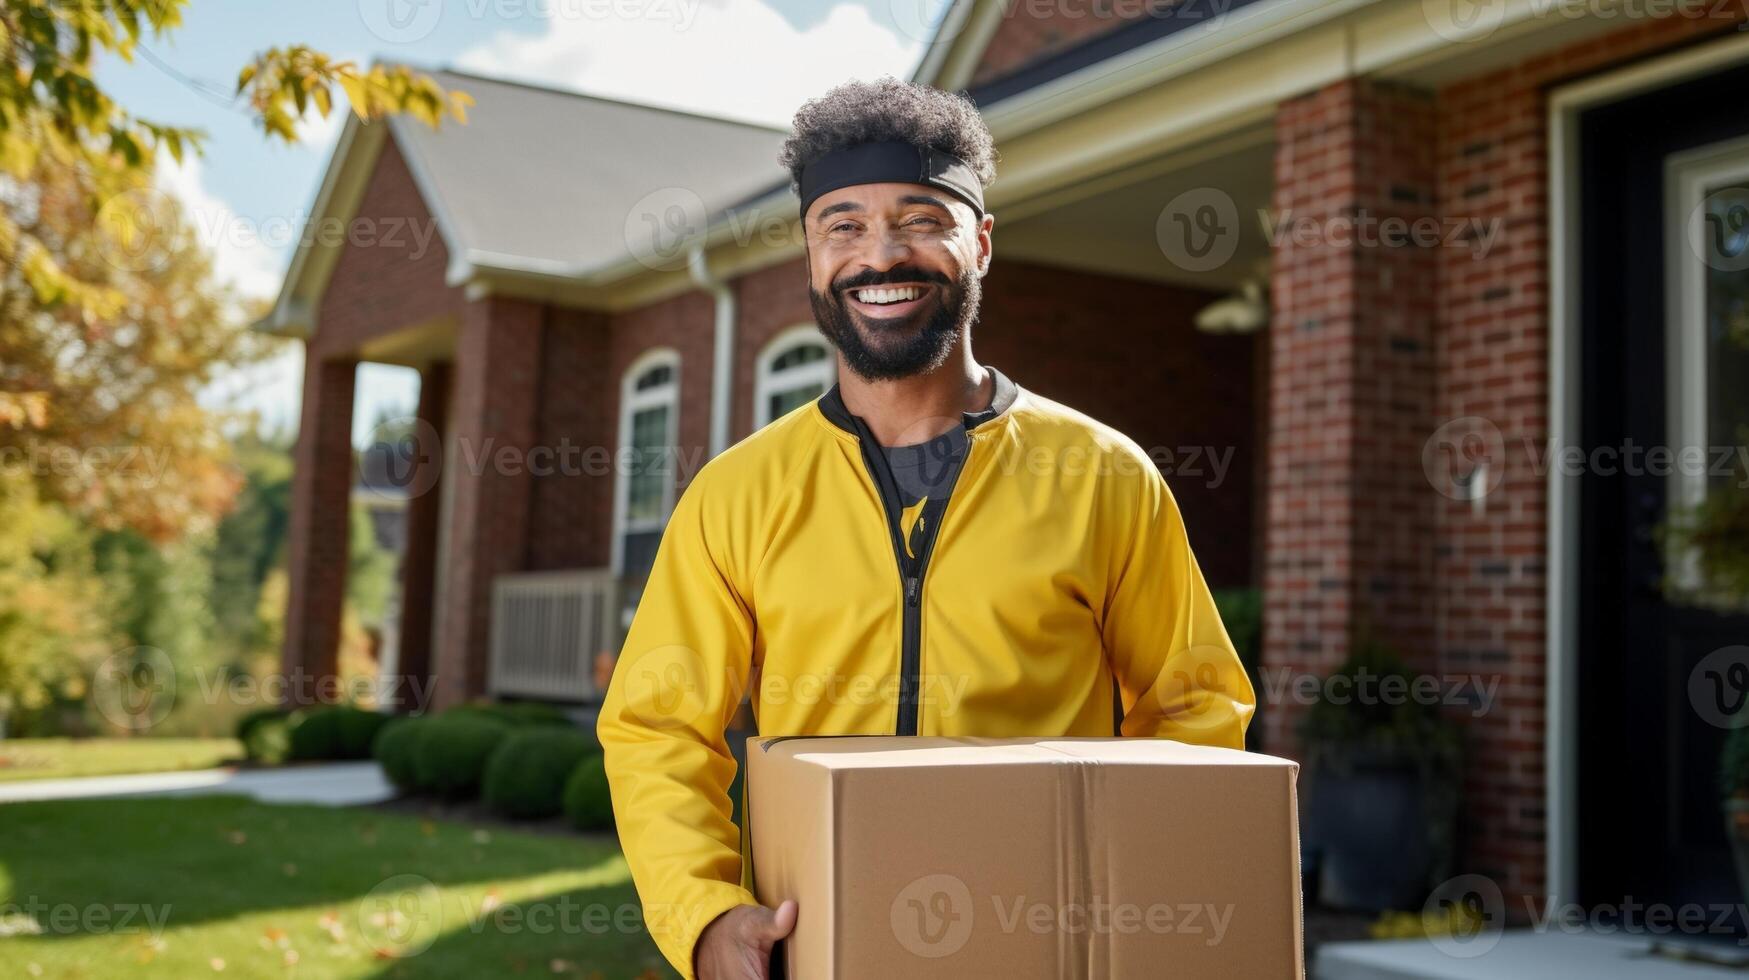 AI generated A cheerful delivery man in a yellow uniform with a cap smiles, holding a package, ready to make a doorstep delivery in a residential area photo